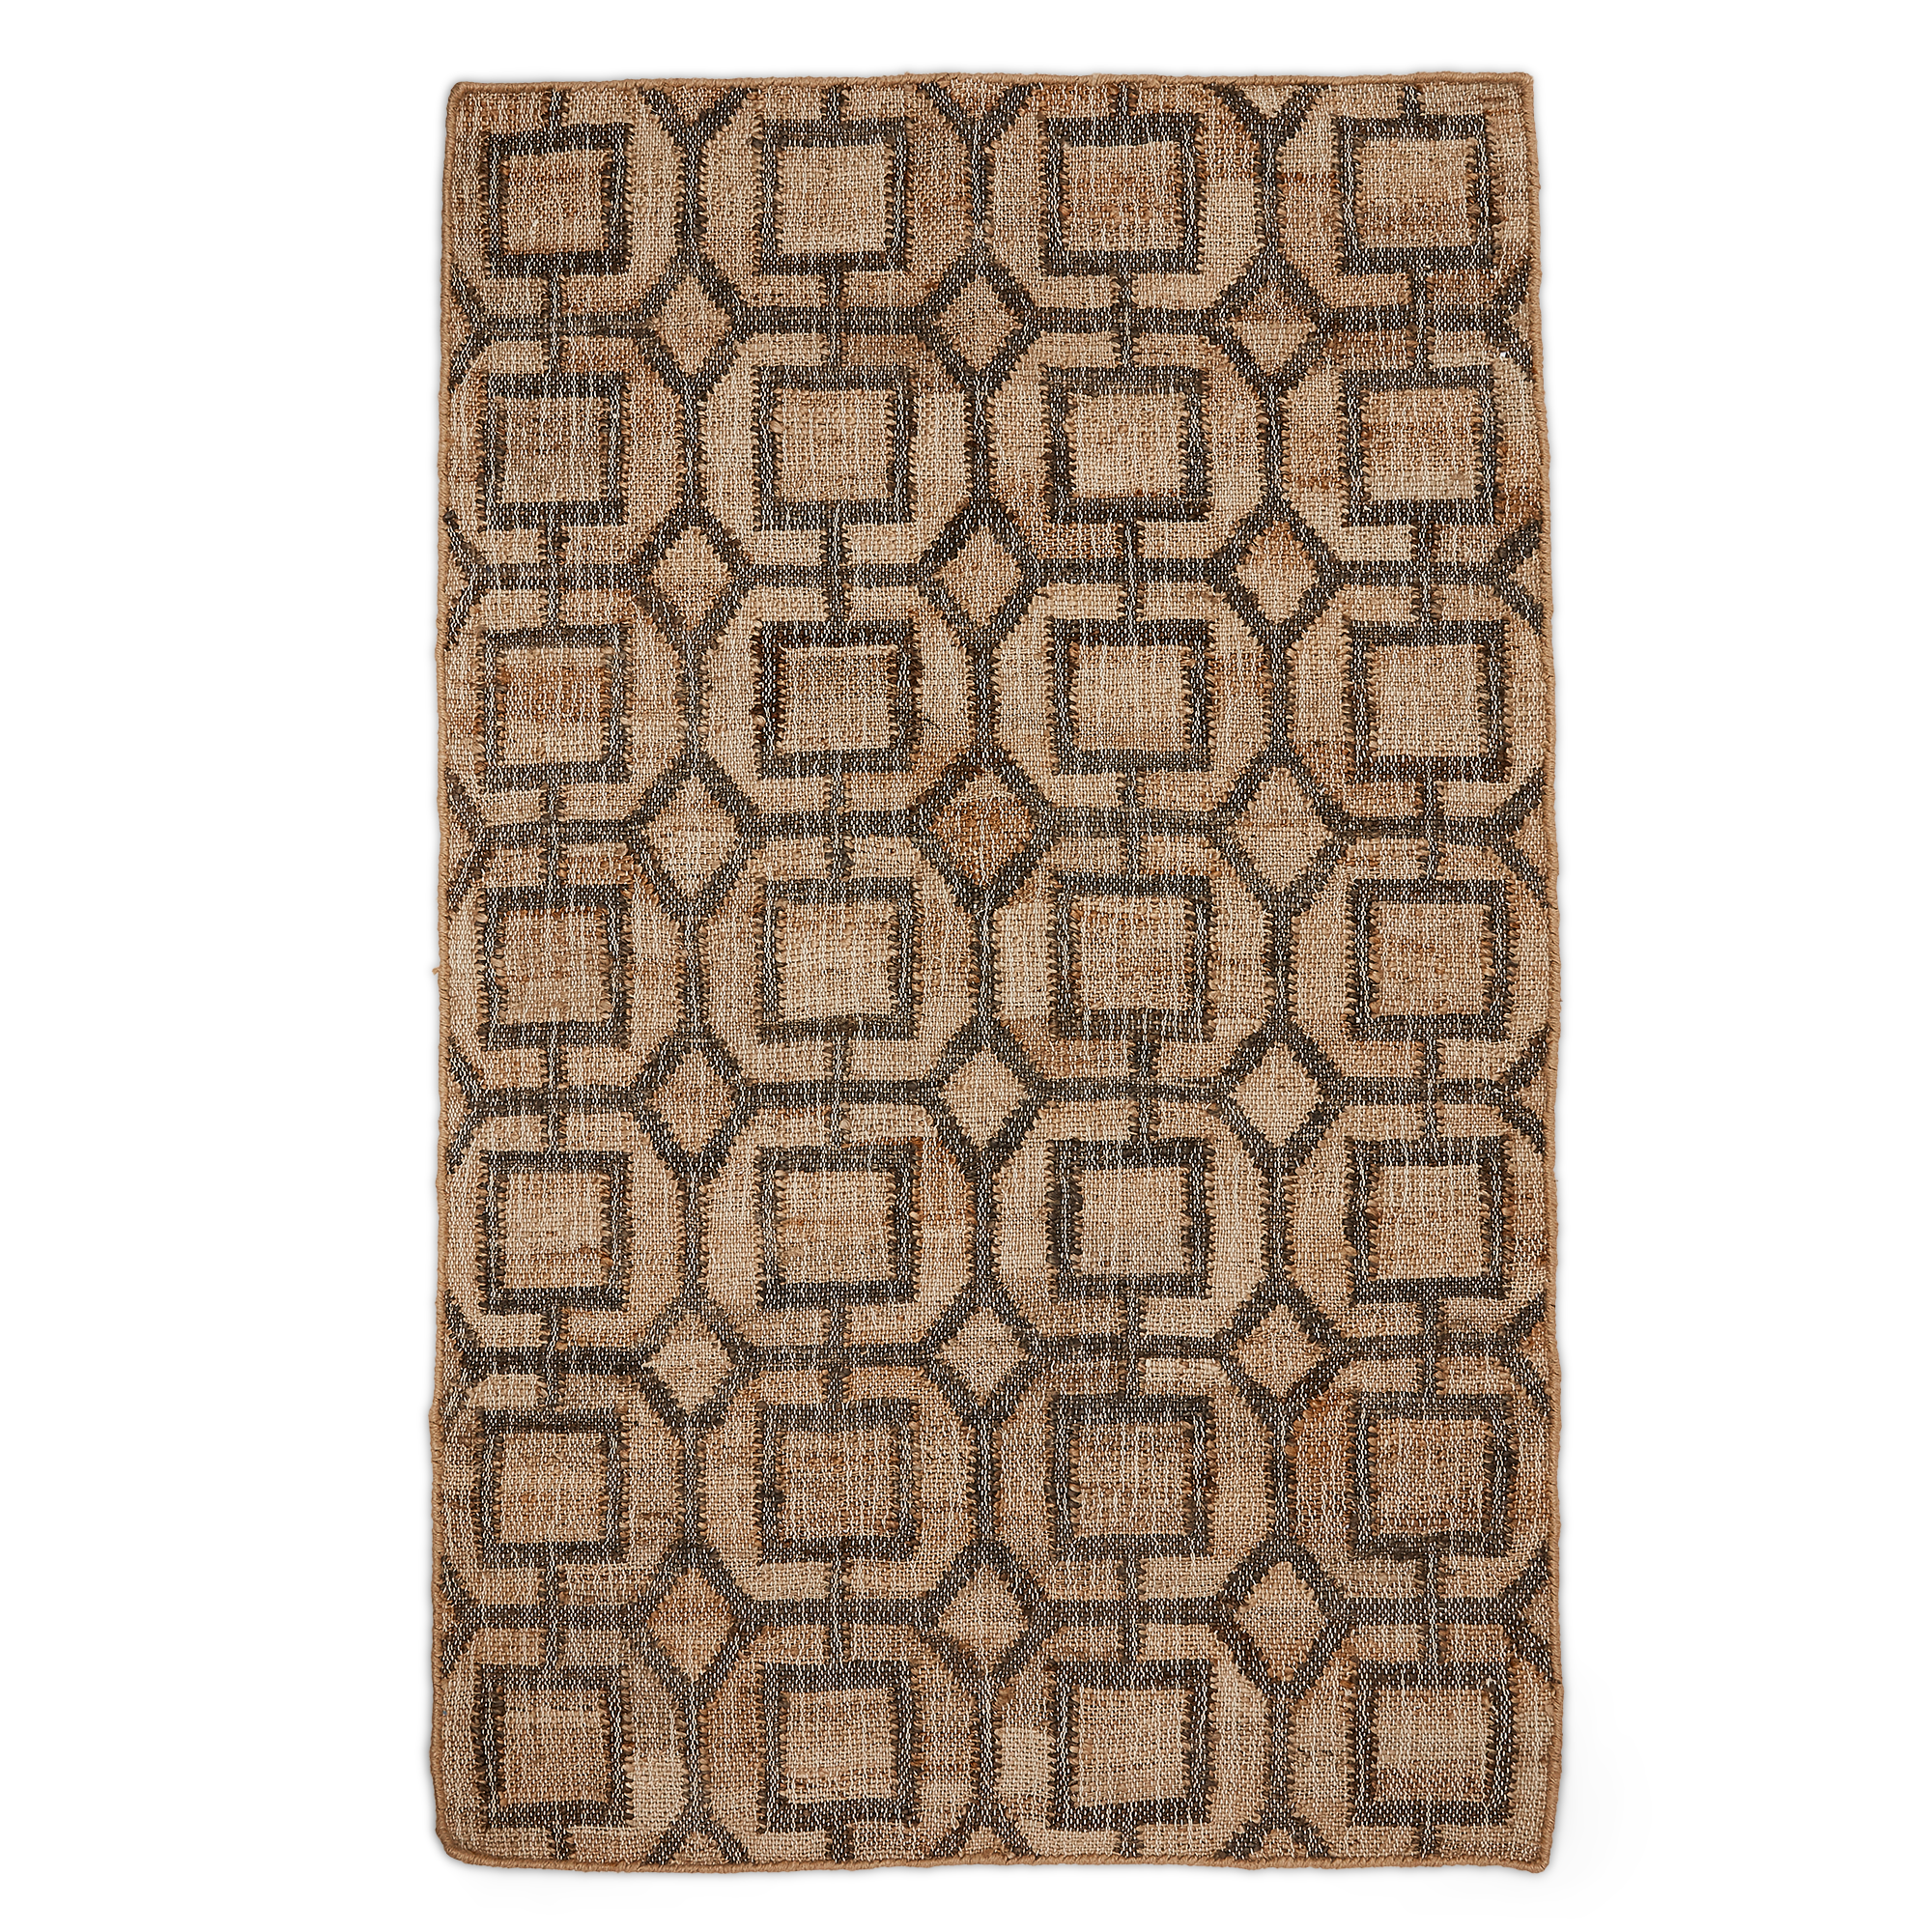 Top view, Fern hand-woven Jute and natural charcoal goemetric patterned rug.